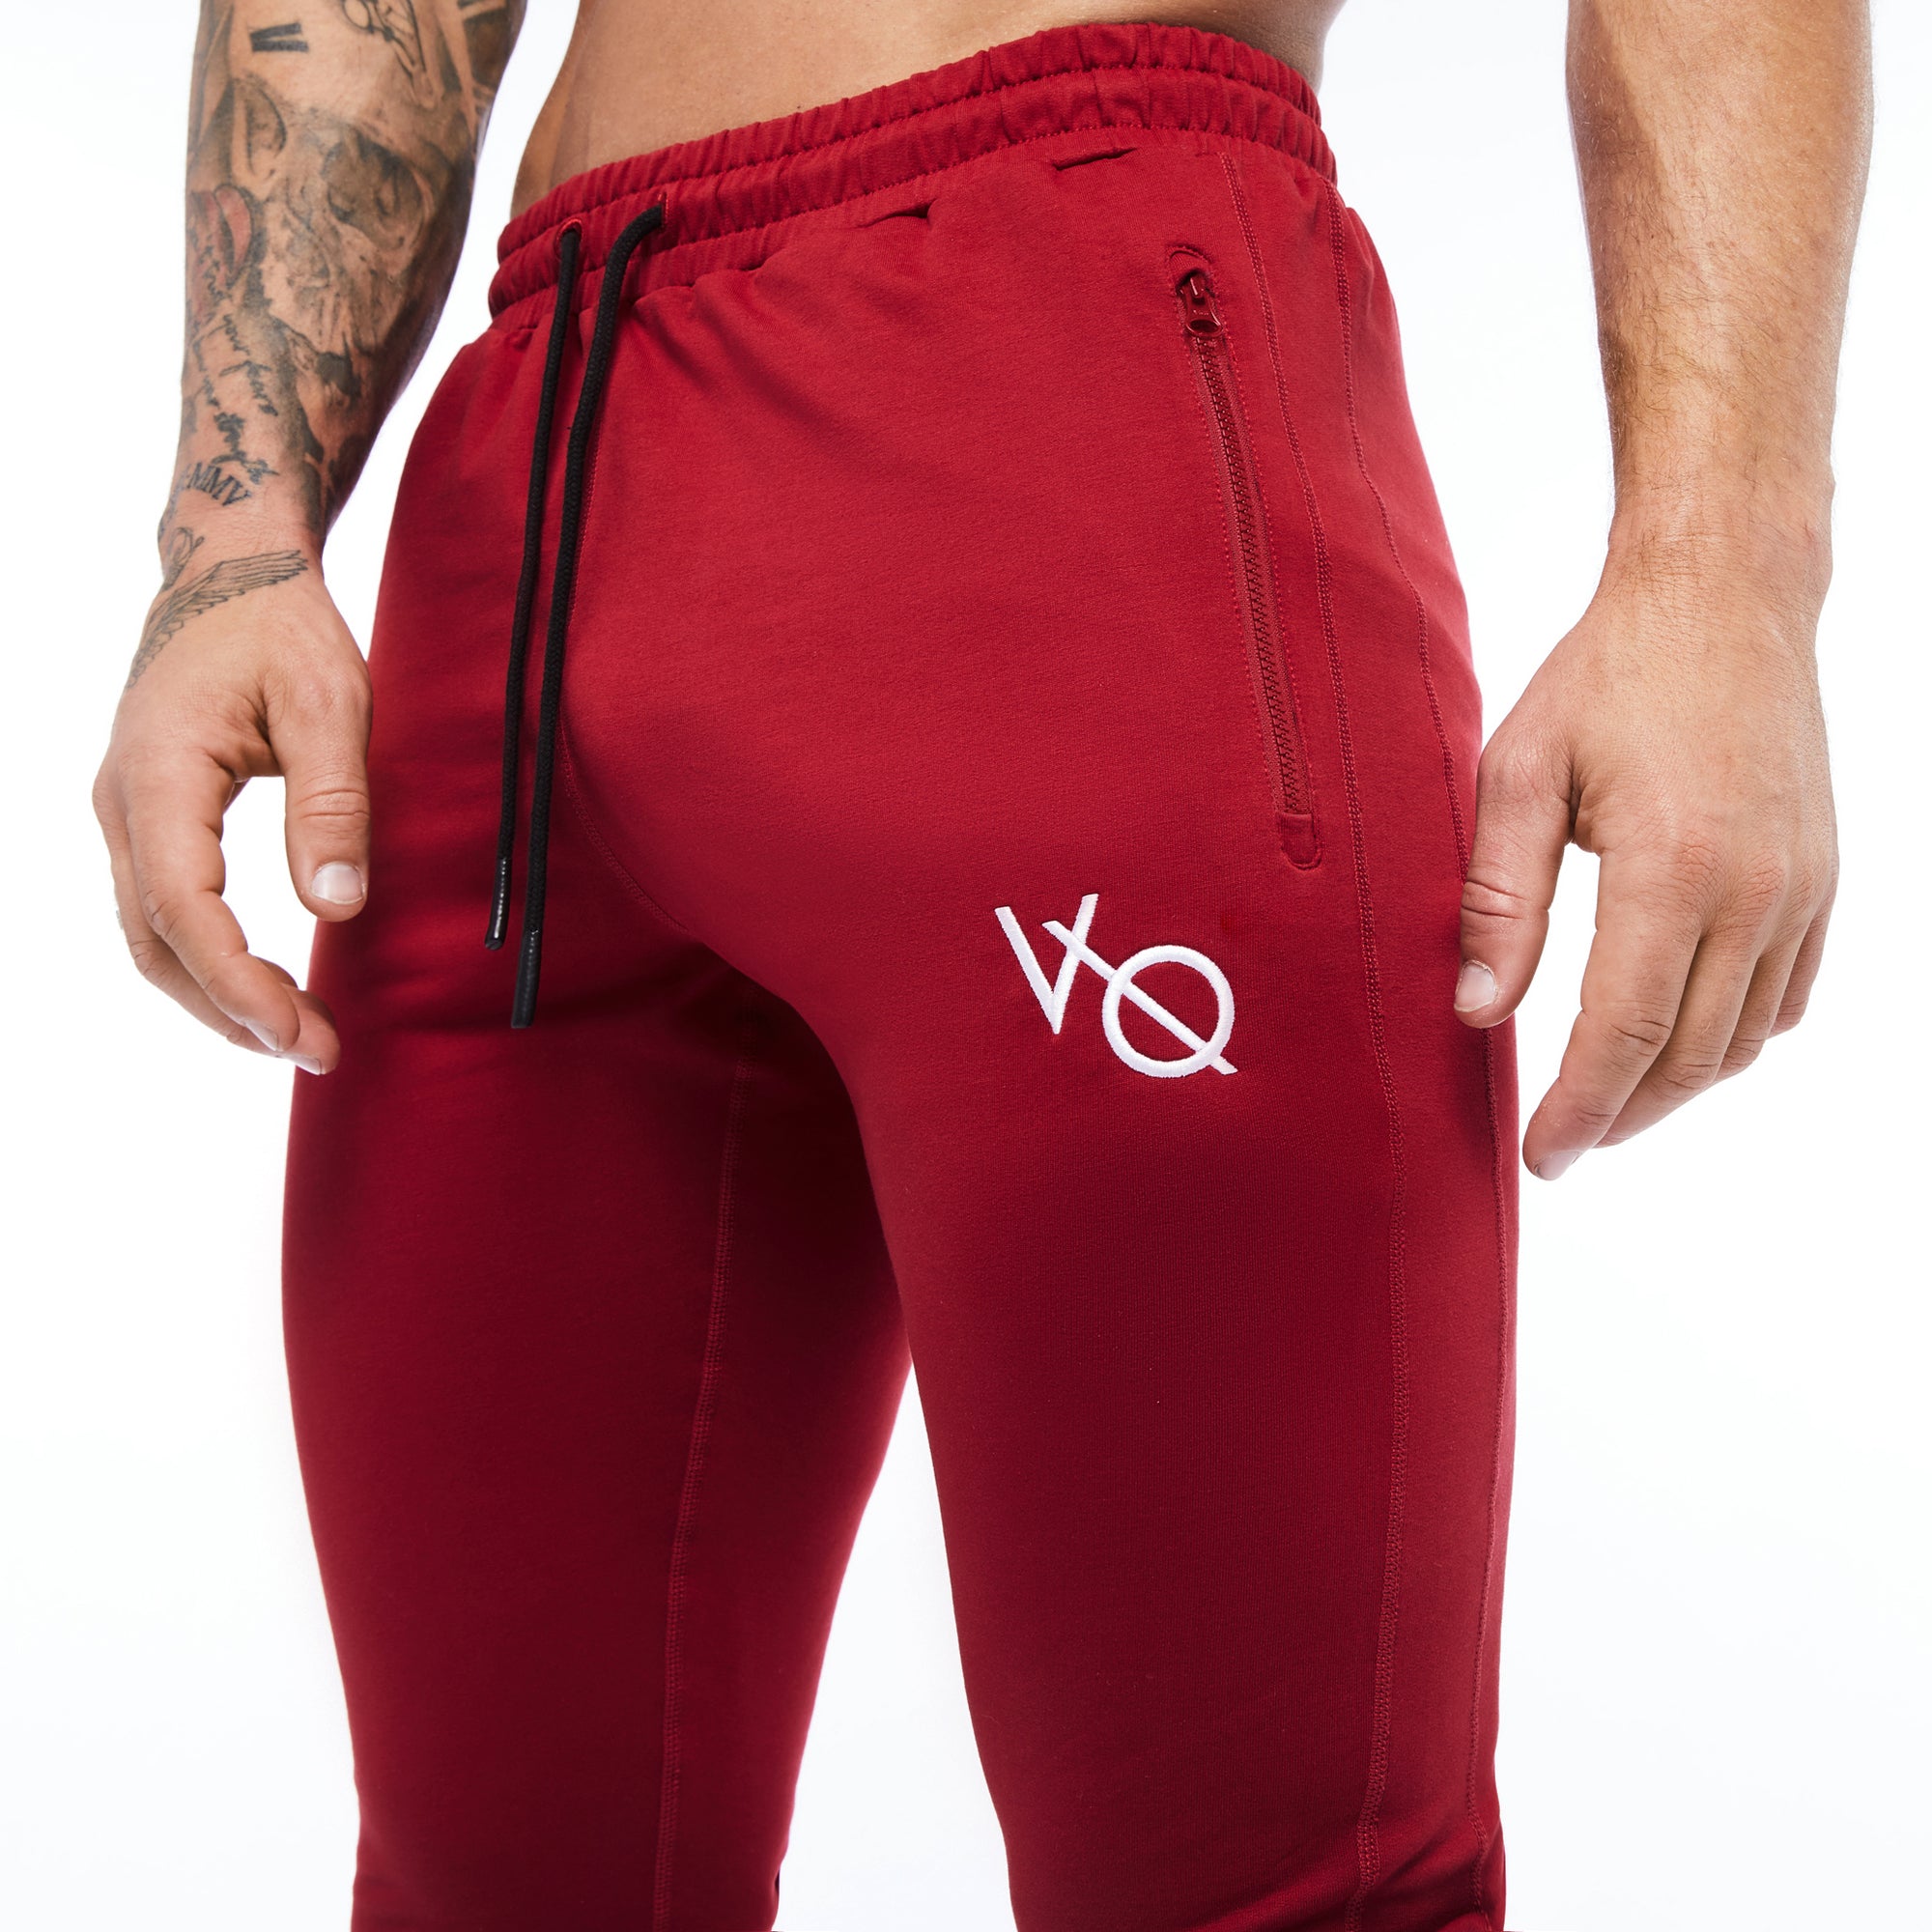 Vanquish Eclipse Red Tapered Sweatpants